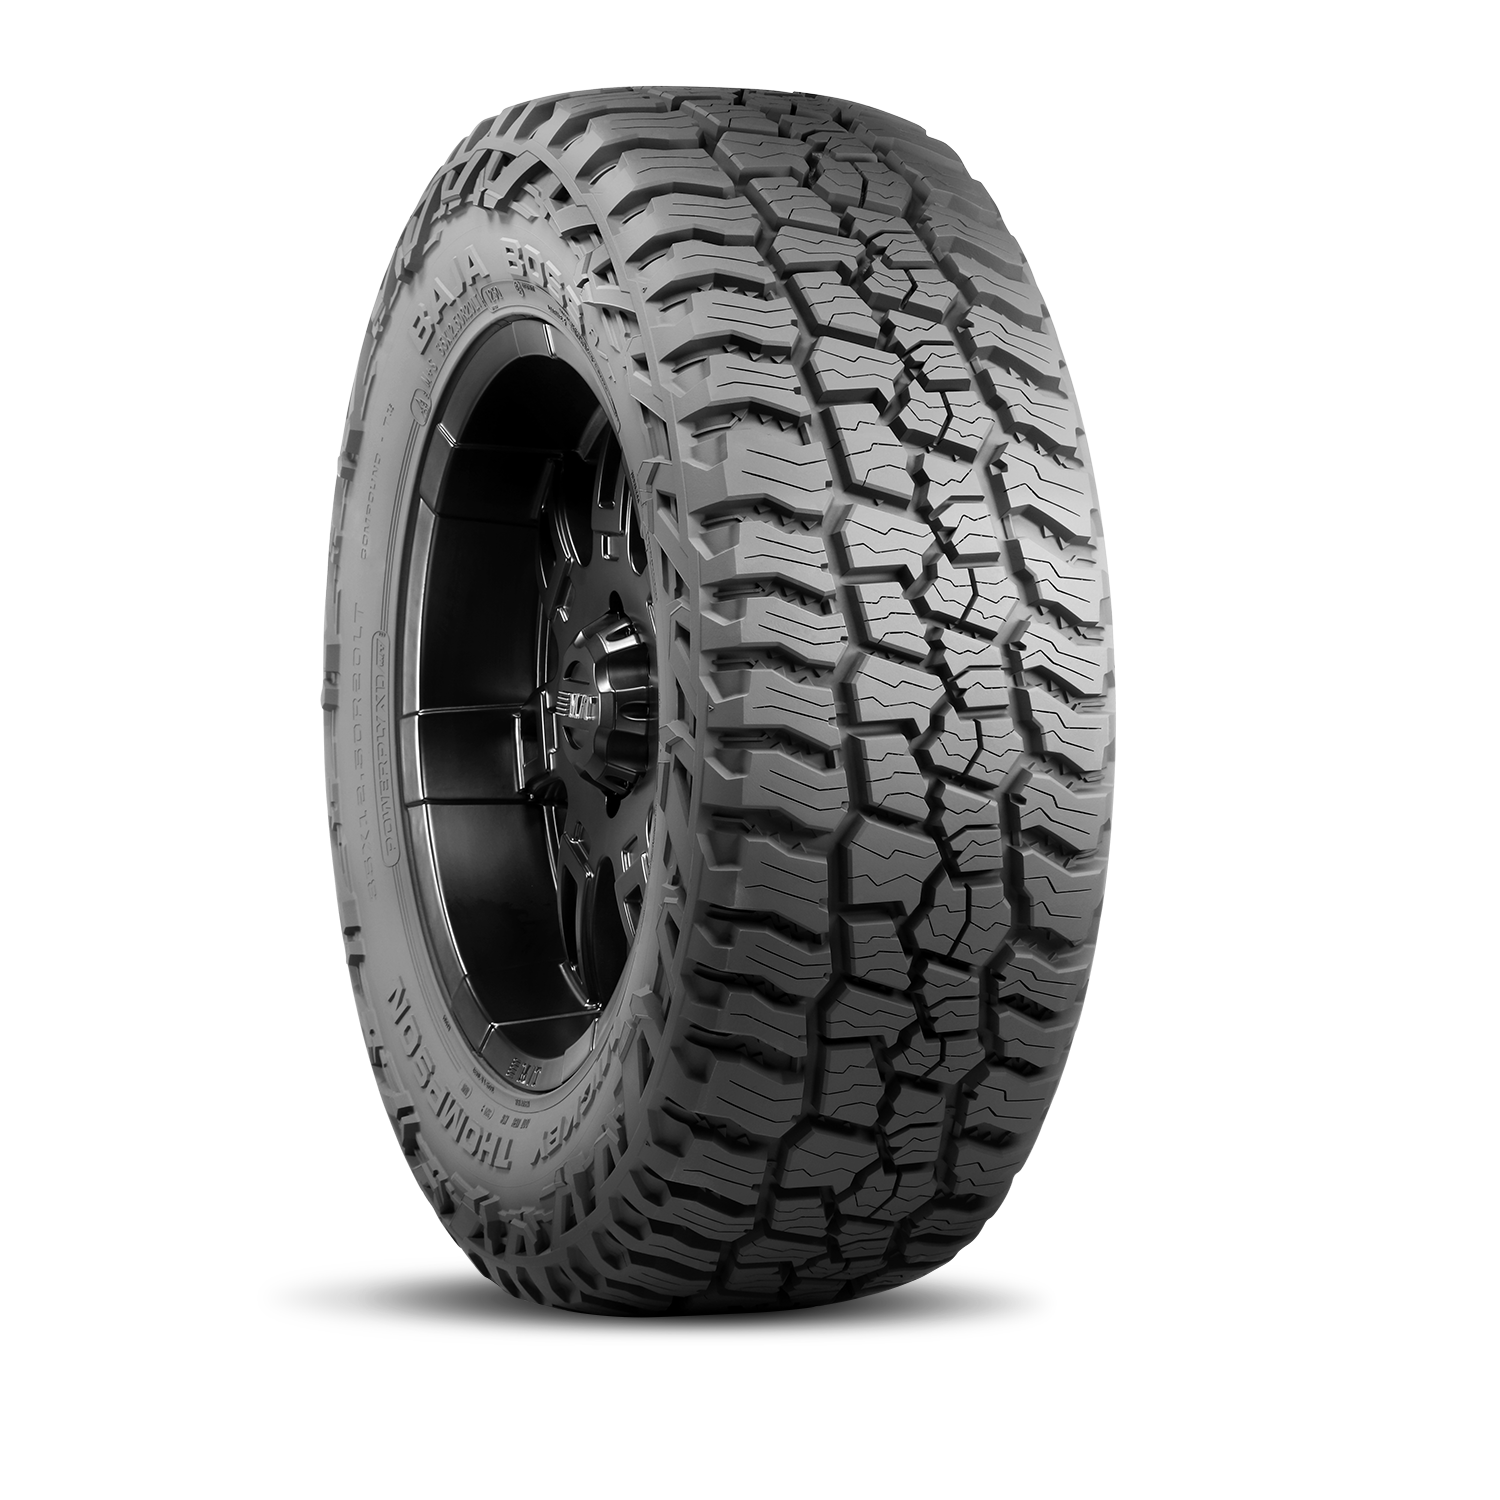 LT 295/55R20 LRE 123/120Q MICKEY THOMPSON BAJA BOSS AT ALL-WEATHER TIRES (M+S + SNOWFLAKE)